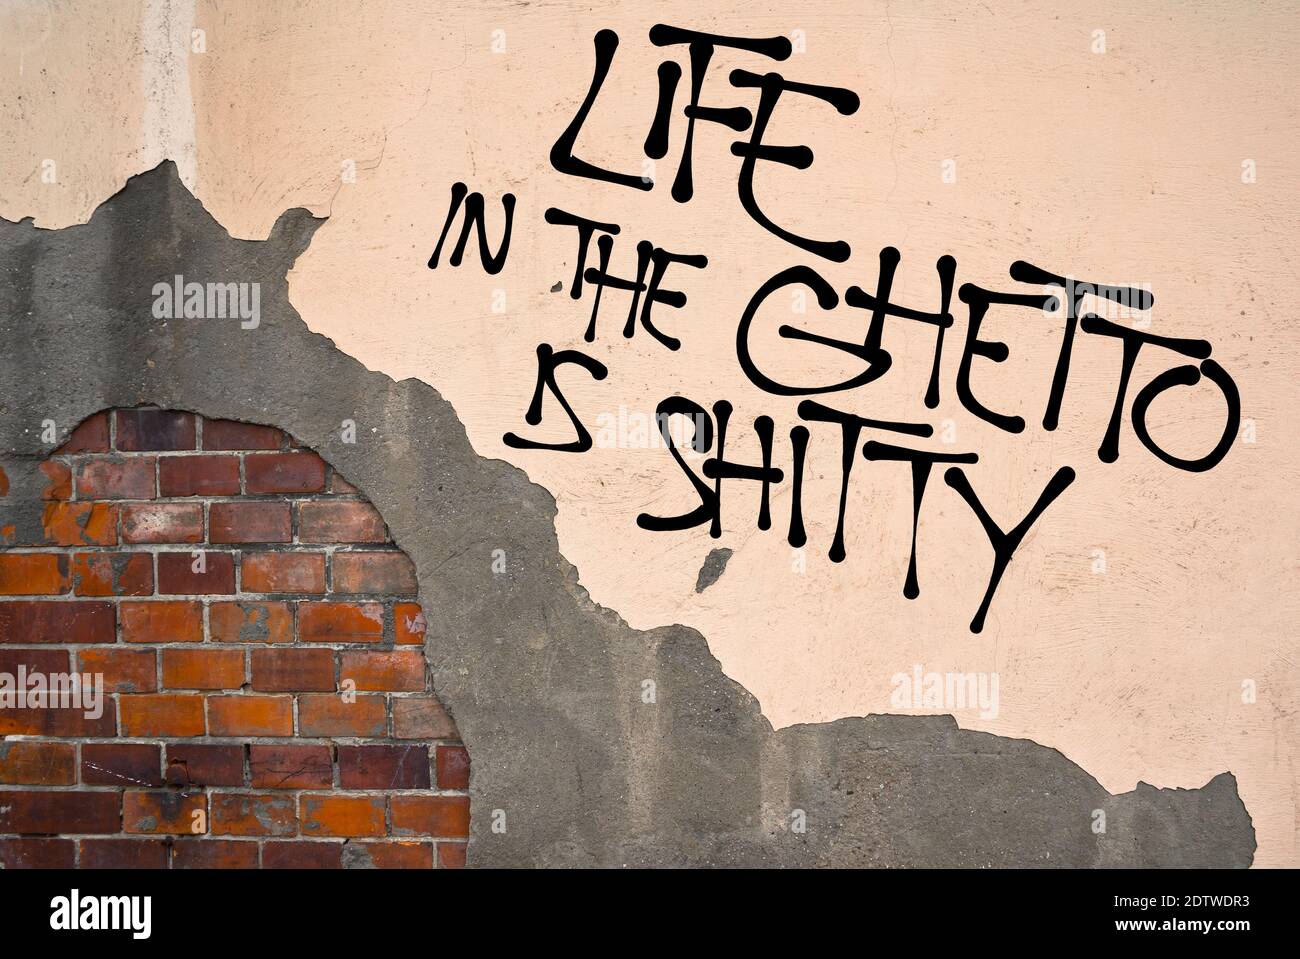 Life In The Ghetto Is Shitty - Handwritten graffiti sprayed on the wall, anarchist aesthetics. Protest against bad conditions in suburbs (criminality, Stock Photo